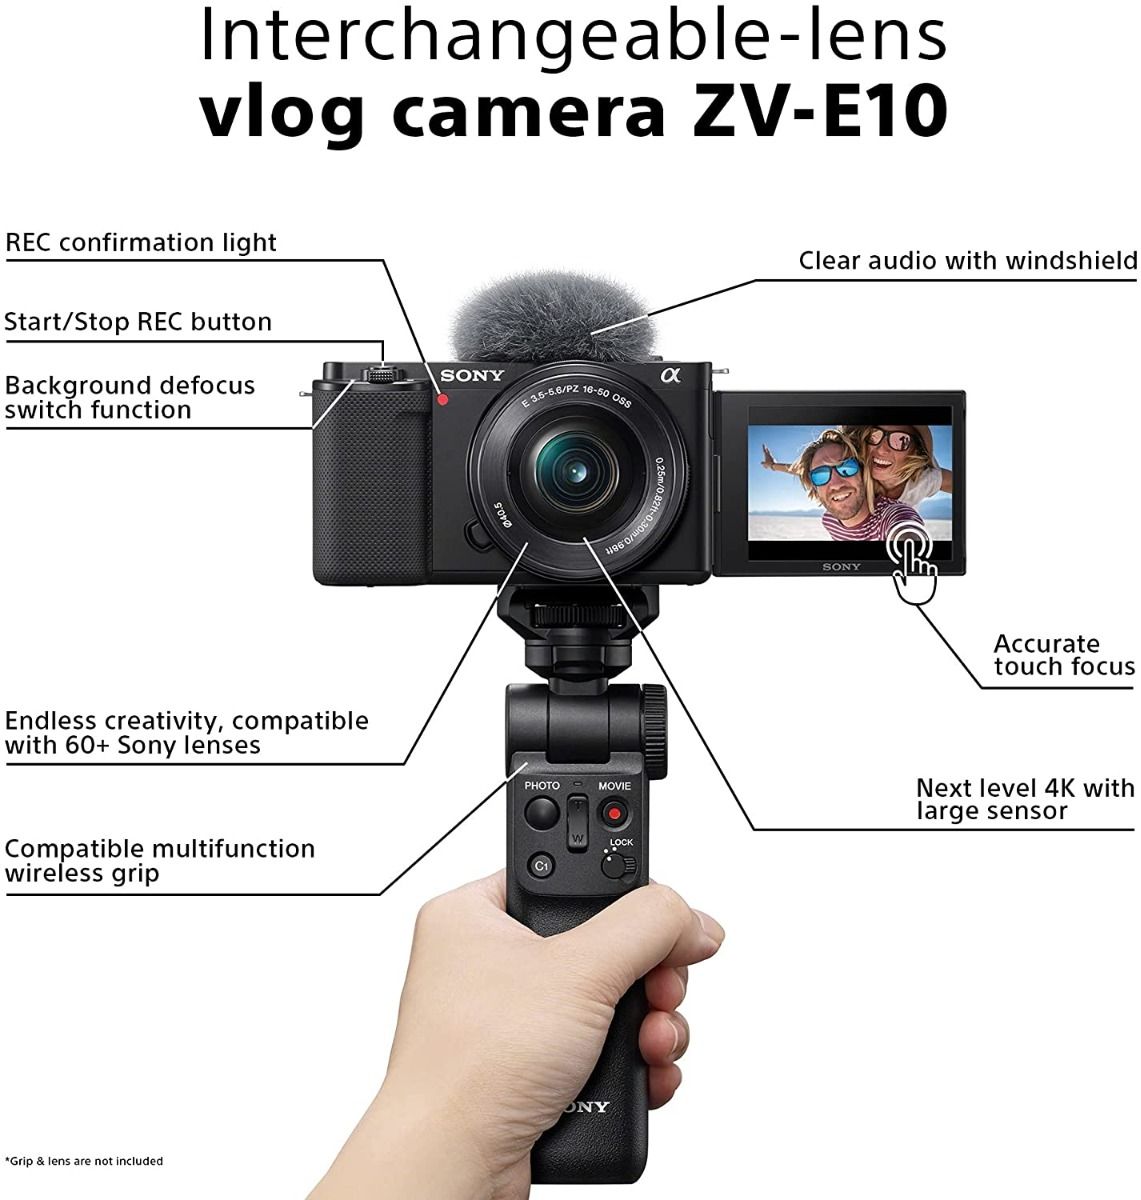 Sony Alpha ZV-E10 APS-C vlog camera with 16-50mm lens - Diagram of features